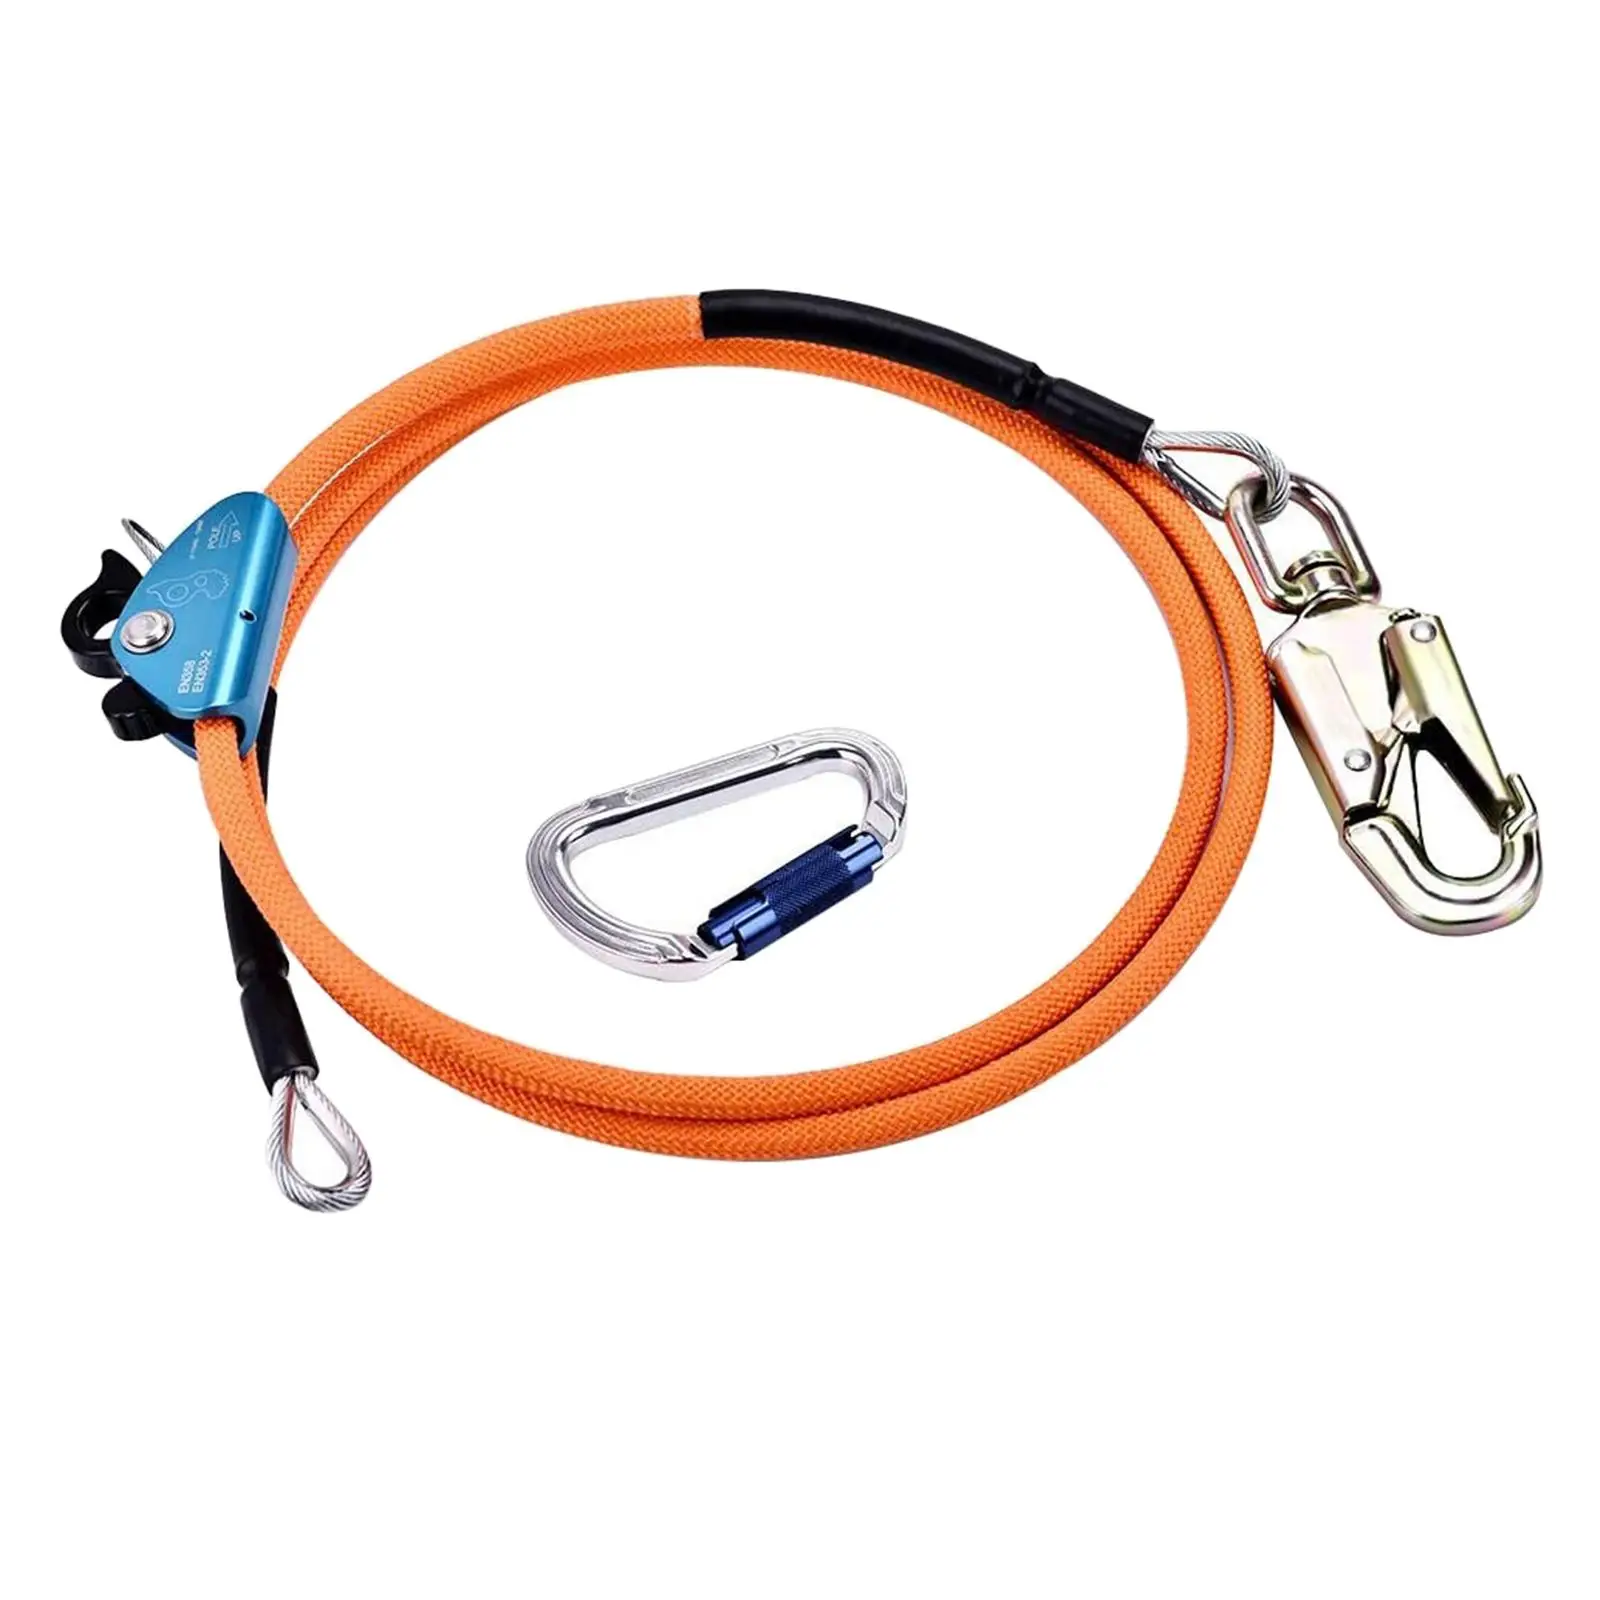 

Positioning Lanyard Adjustable Kit with Carabineer with Steel Snap Hook Climbers Fall Low Stretch